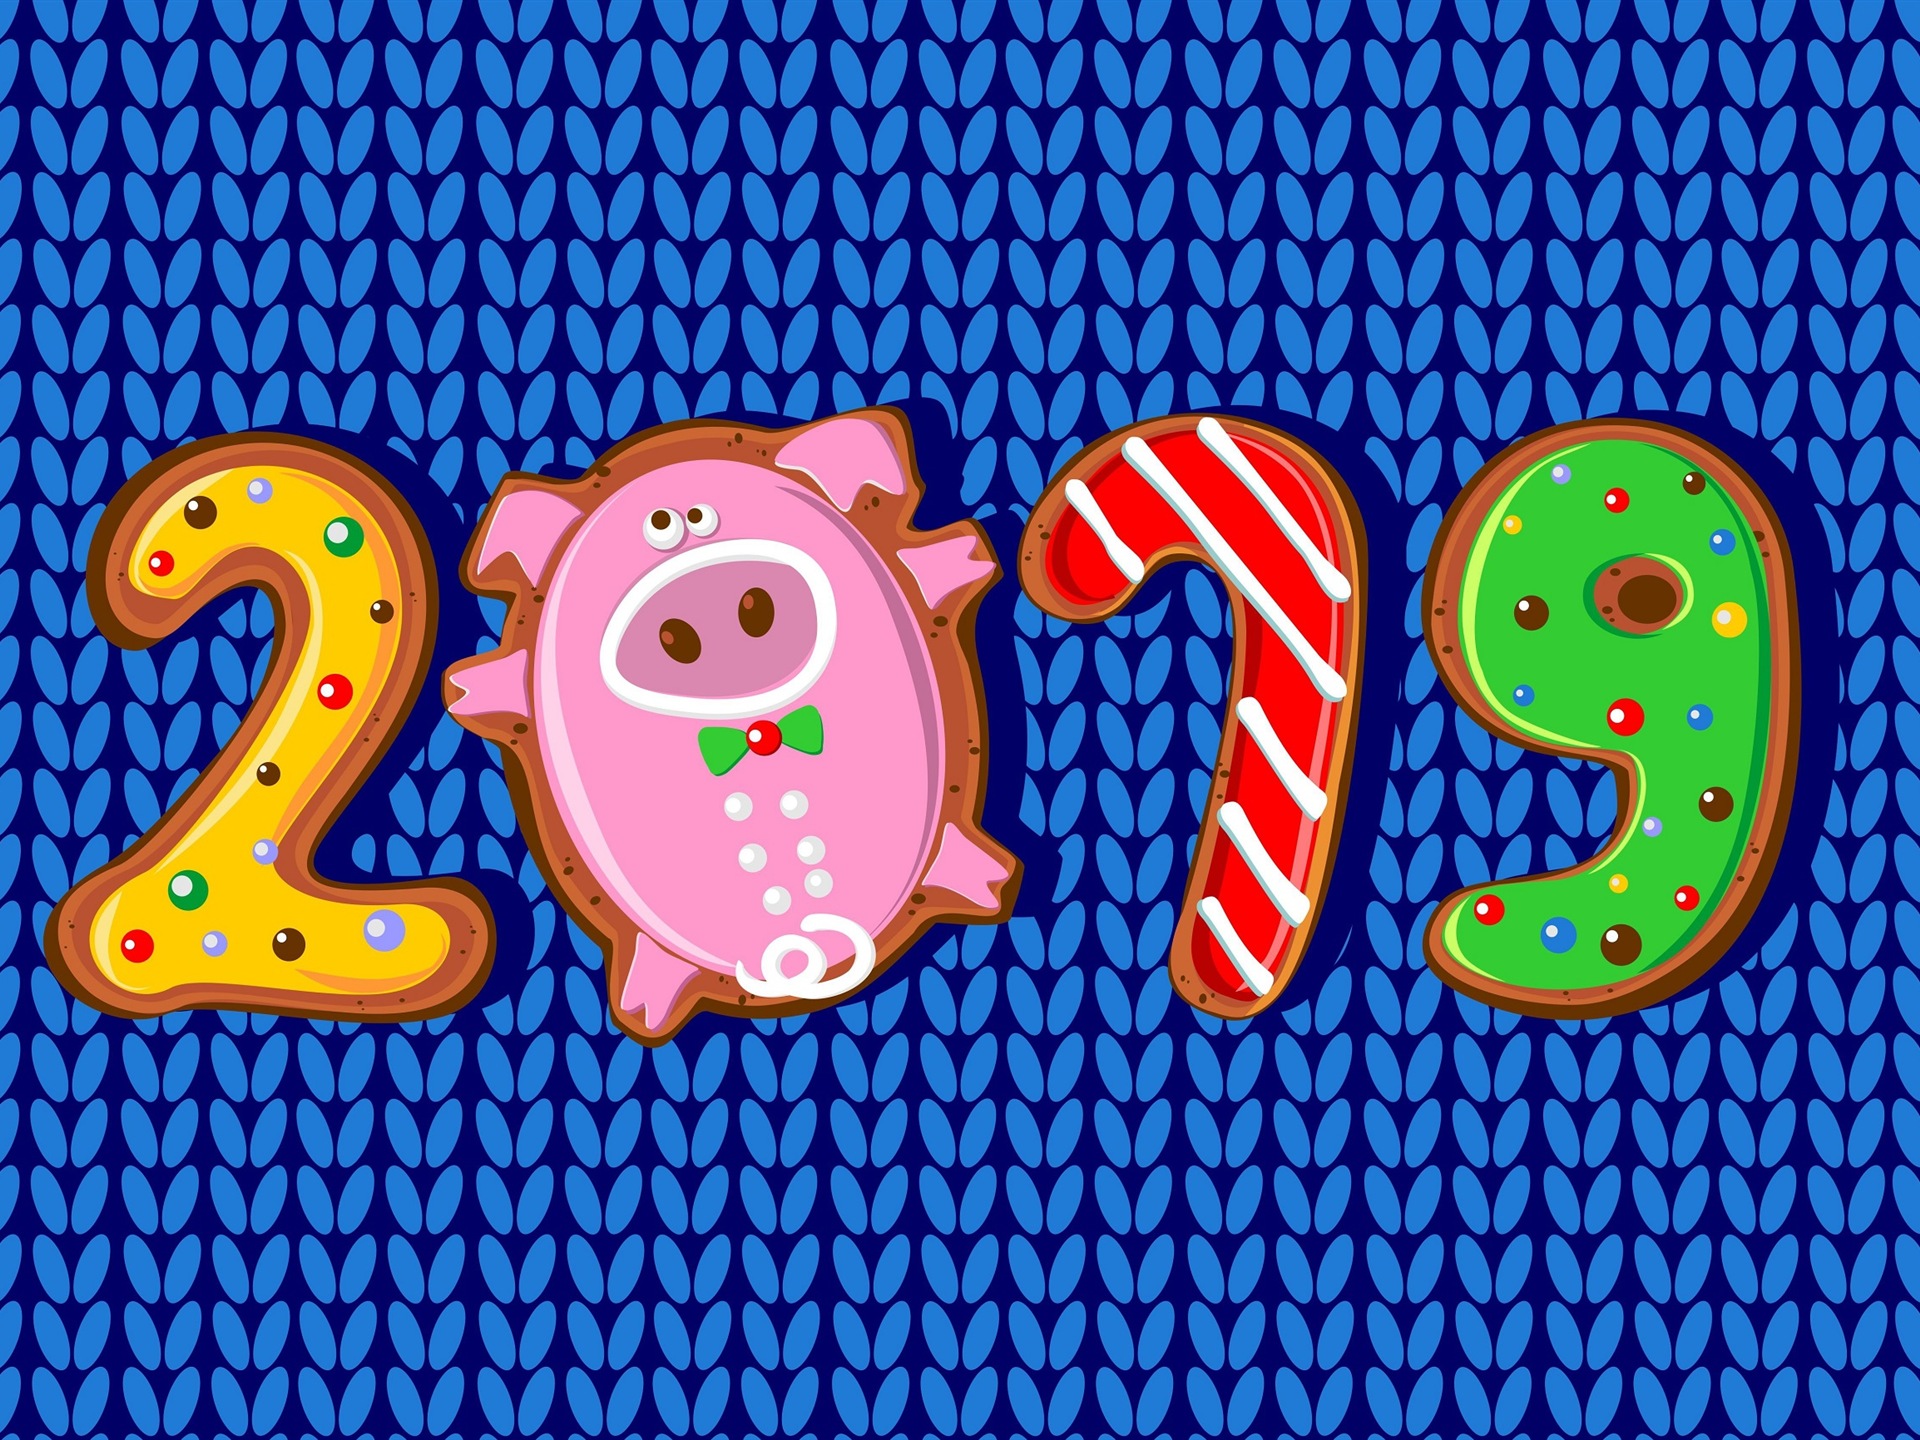 Happy New Year 2019 HD wallpapers #15 - 1920x1440